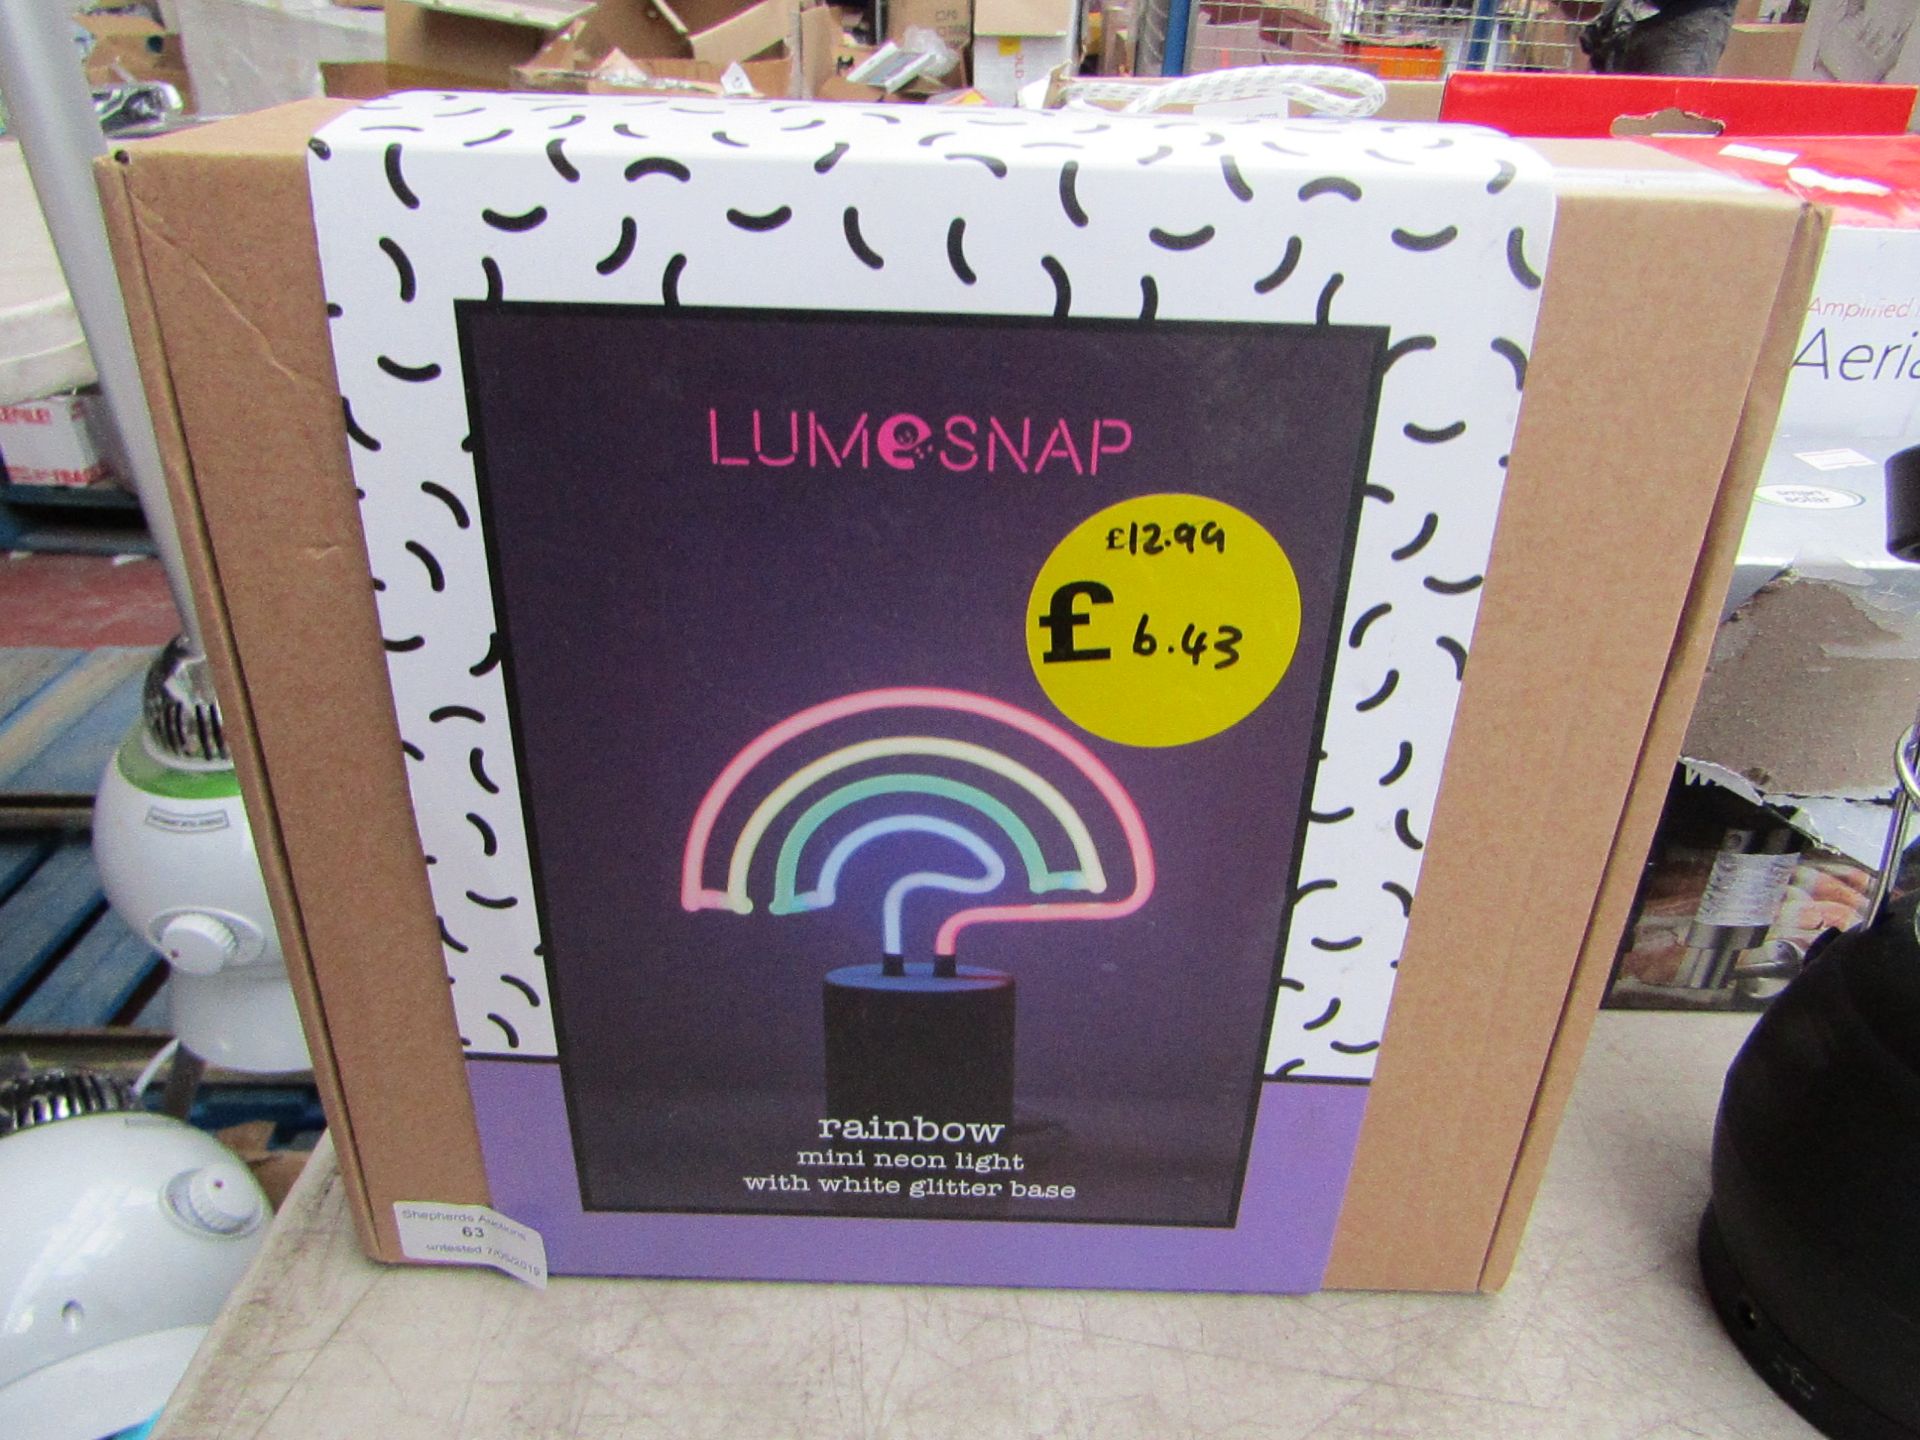 Lumesnap neon light, untested and boxed.